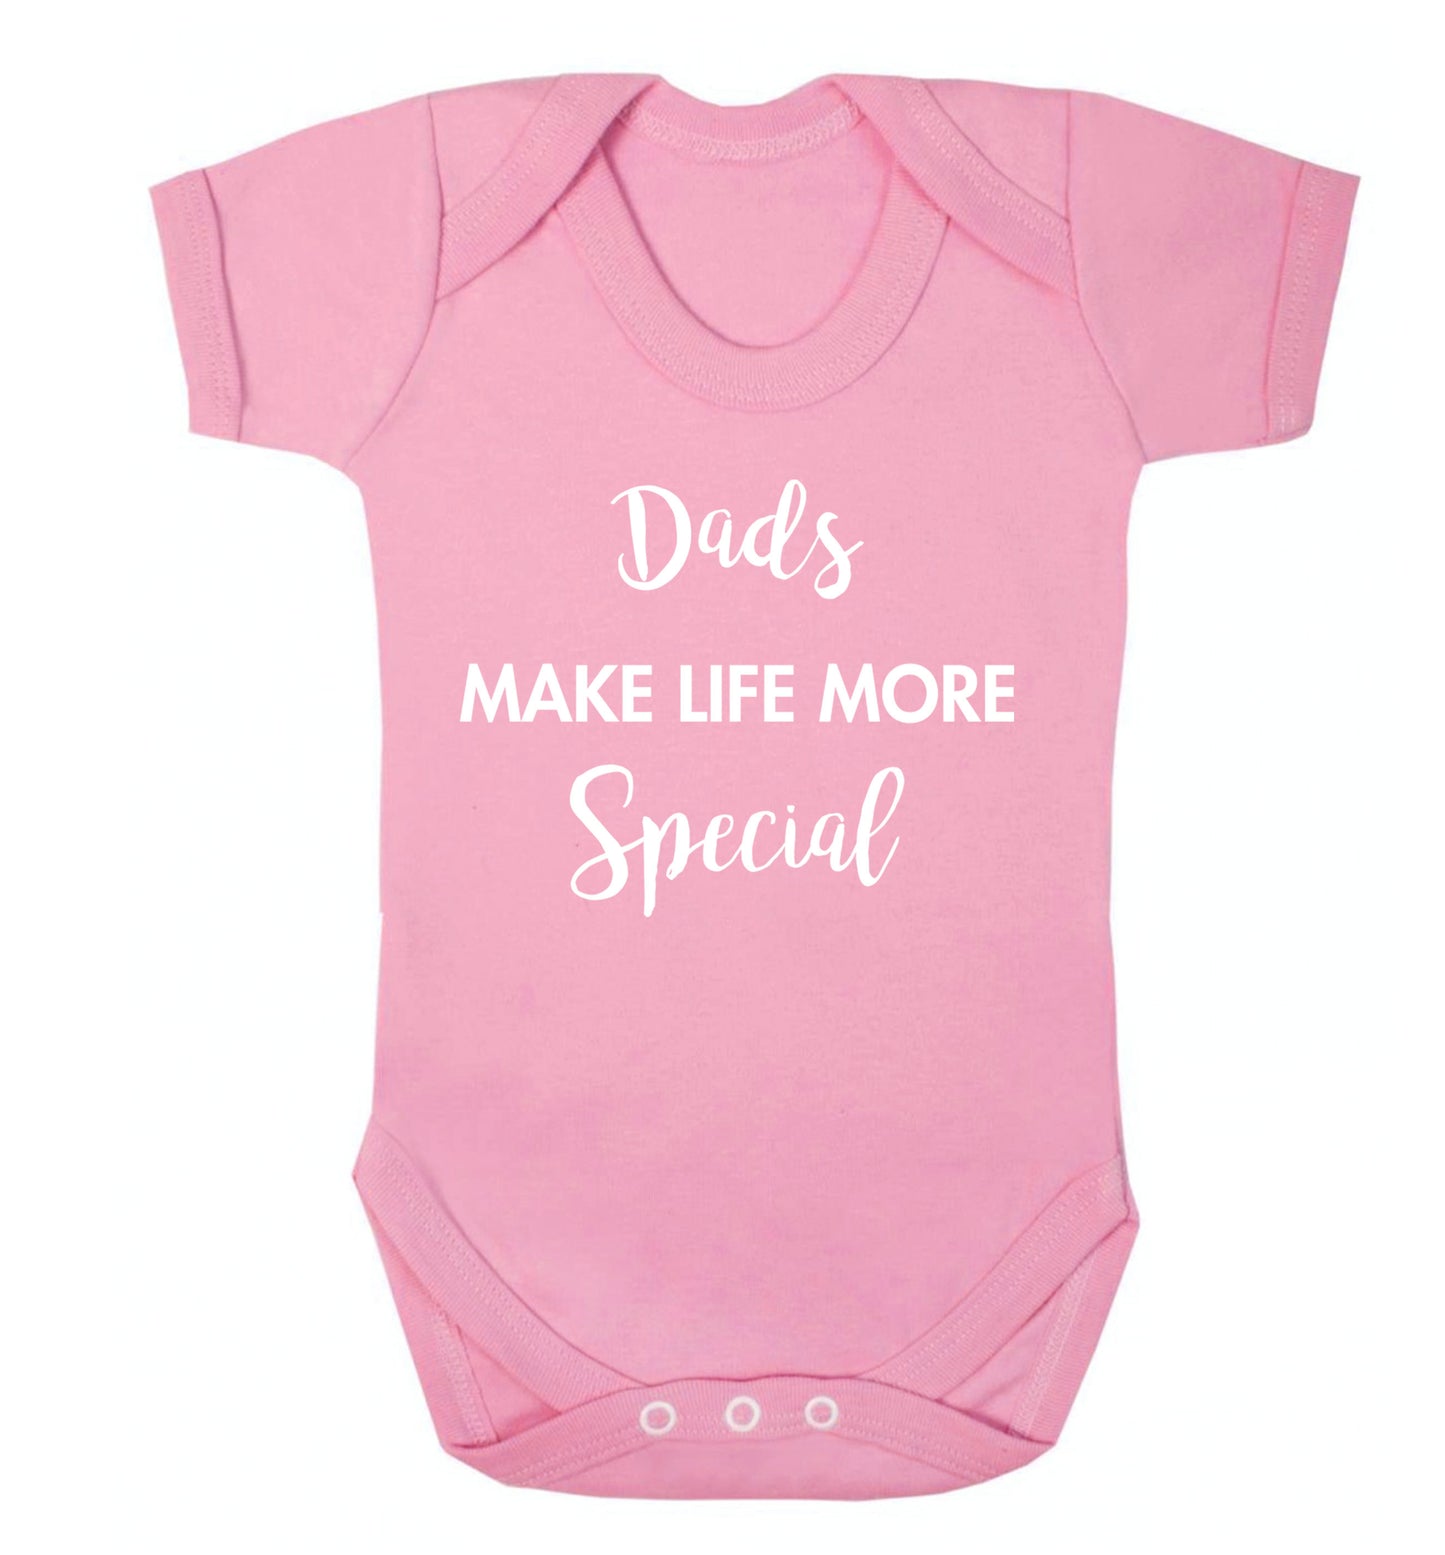 Dads make life more special Baby Vest pale pink 18-24 months